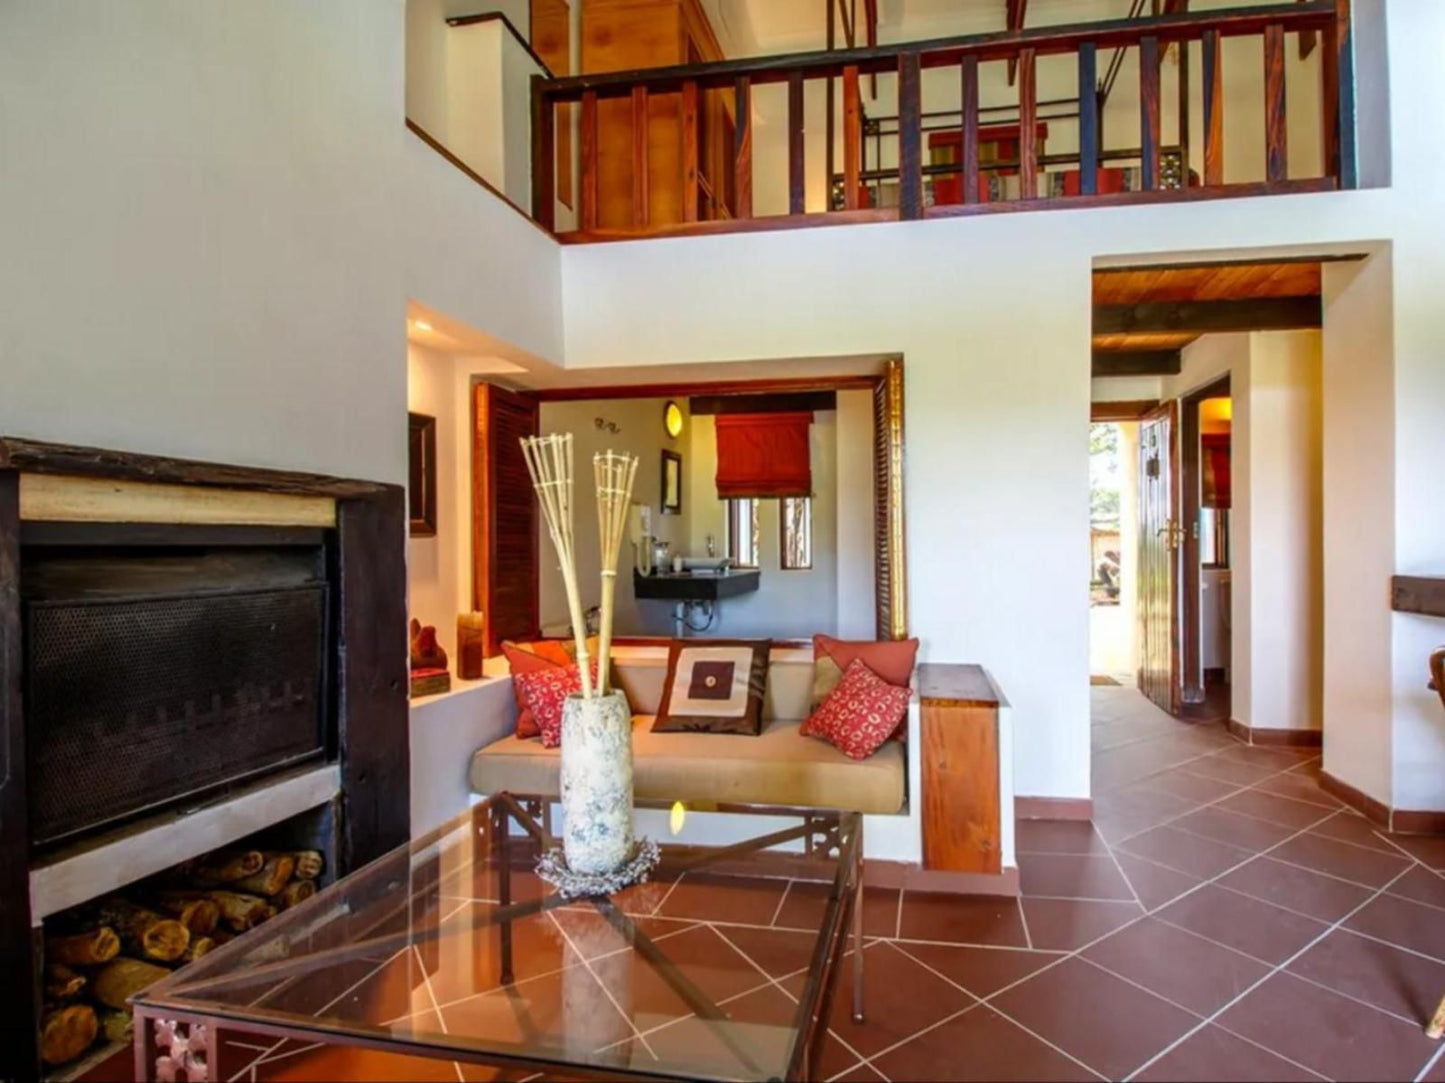 Blue Mountain Luxury Lodge Hazyview Mpumalanga South Africa House, Building, Architecture, Living Room